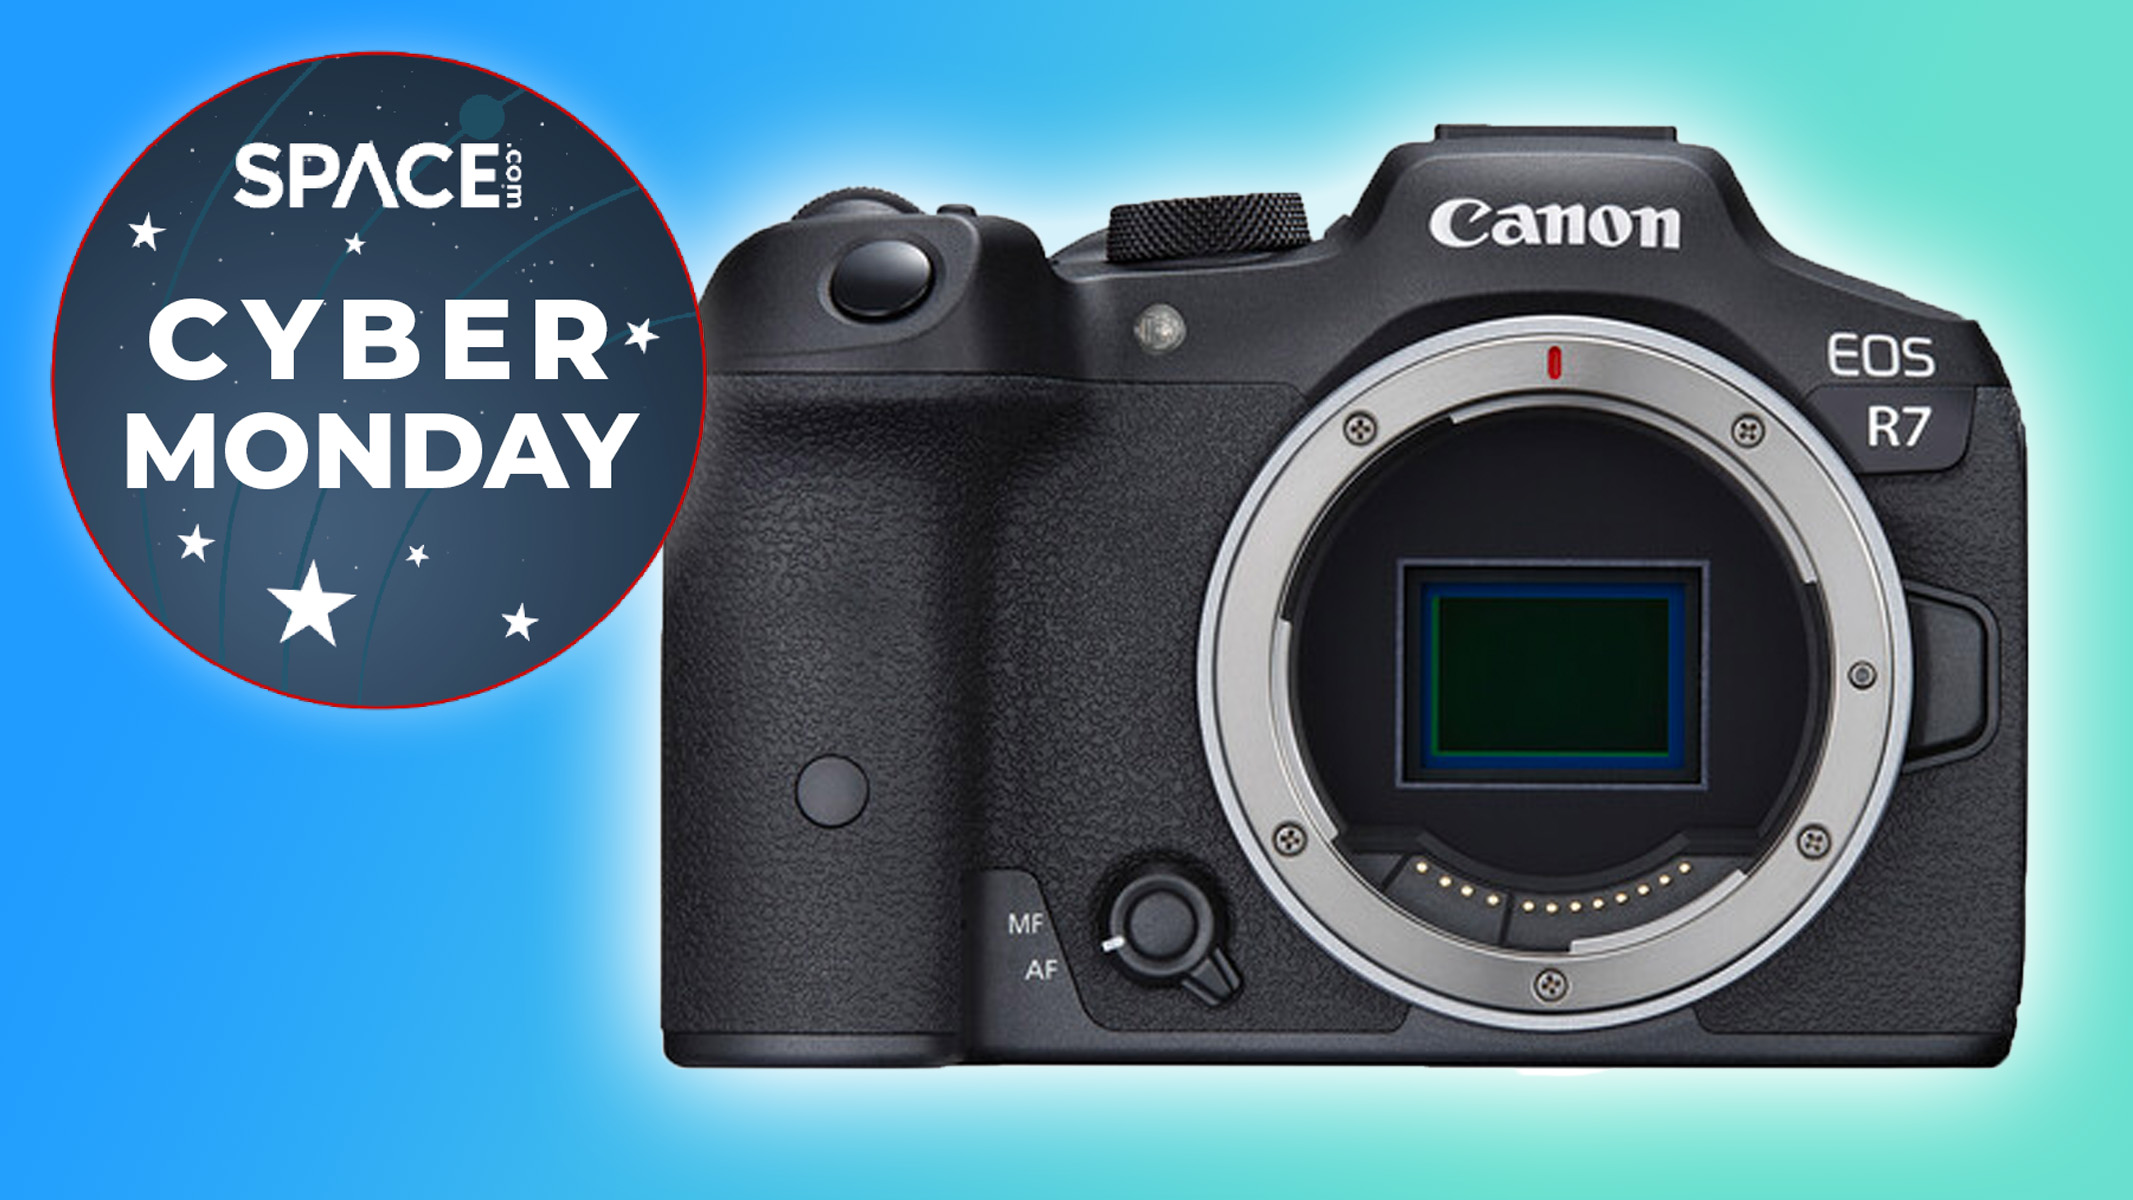 Cyber Monday: Save $100 with this Canon EOS R7 camera deal Space